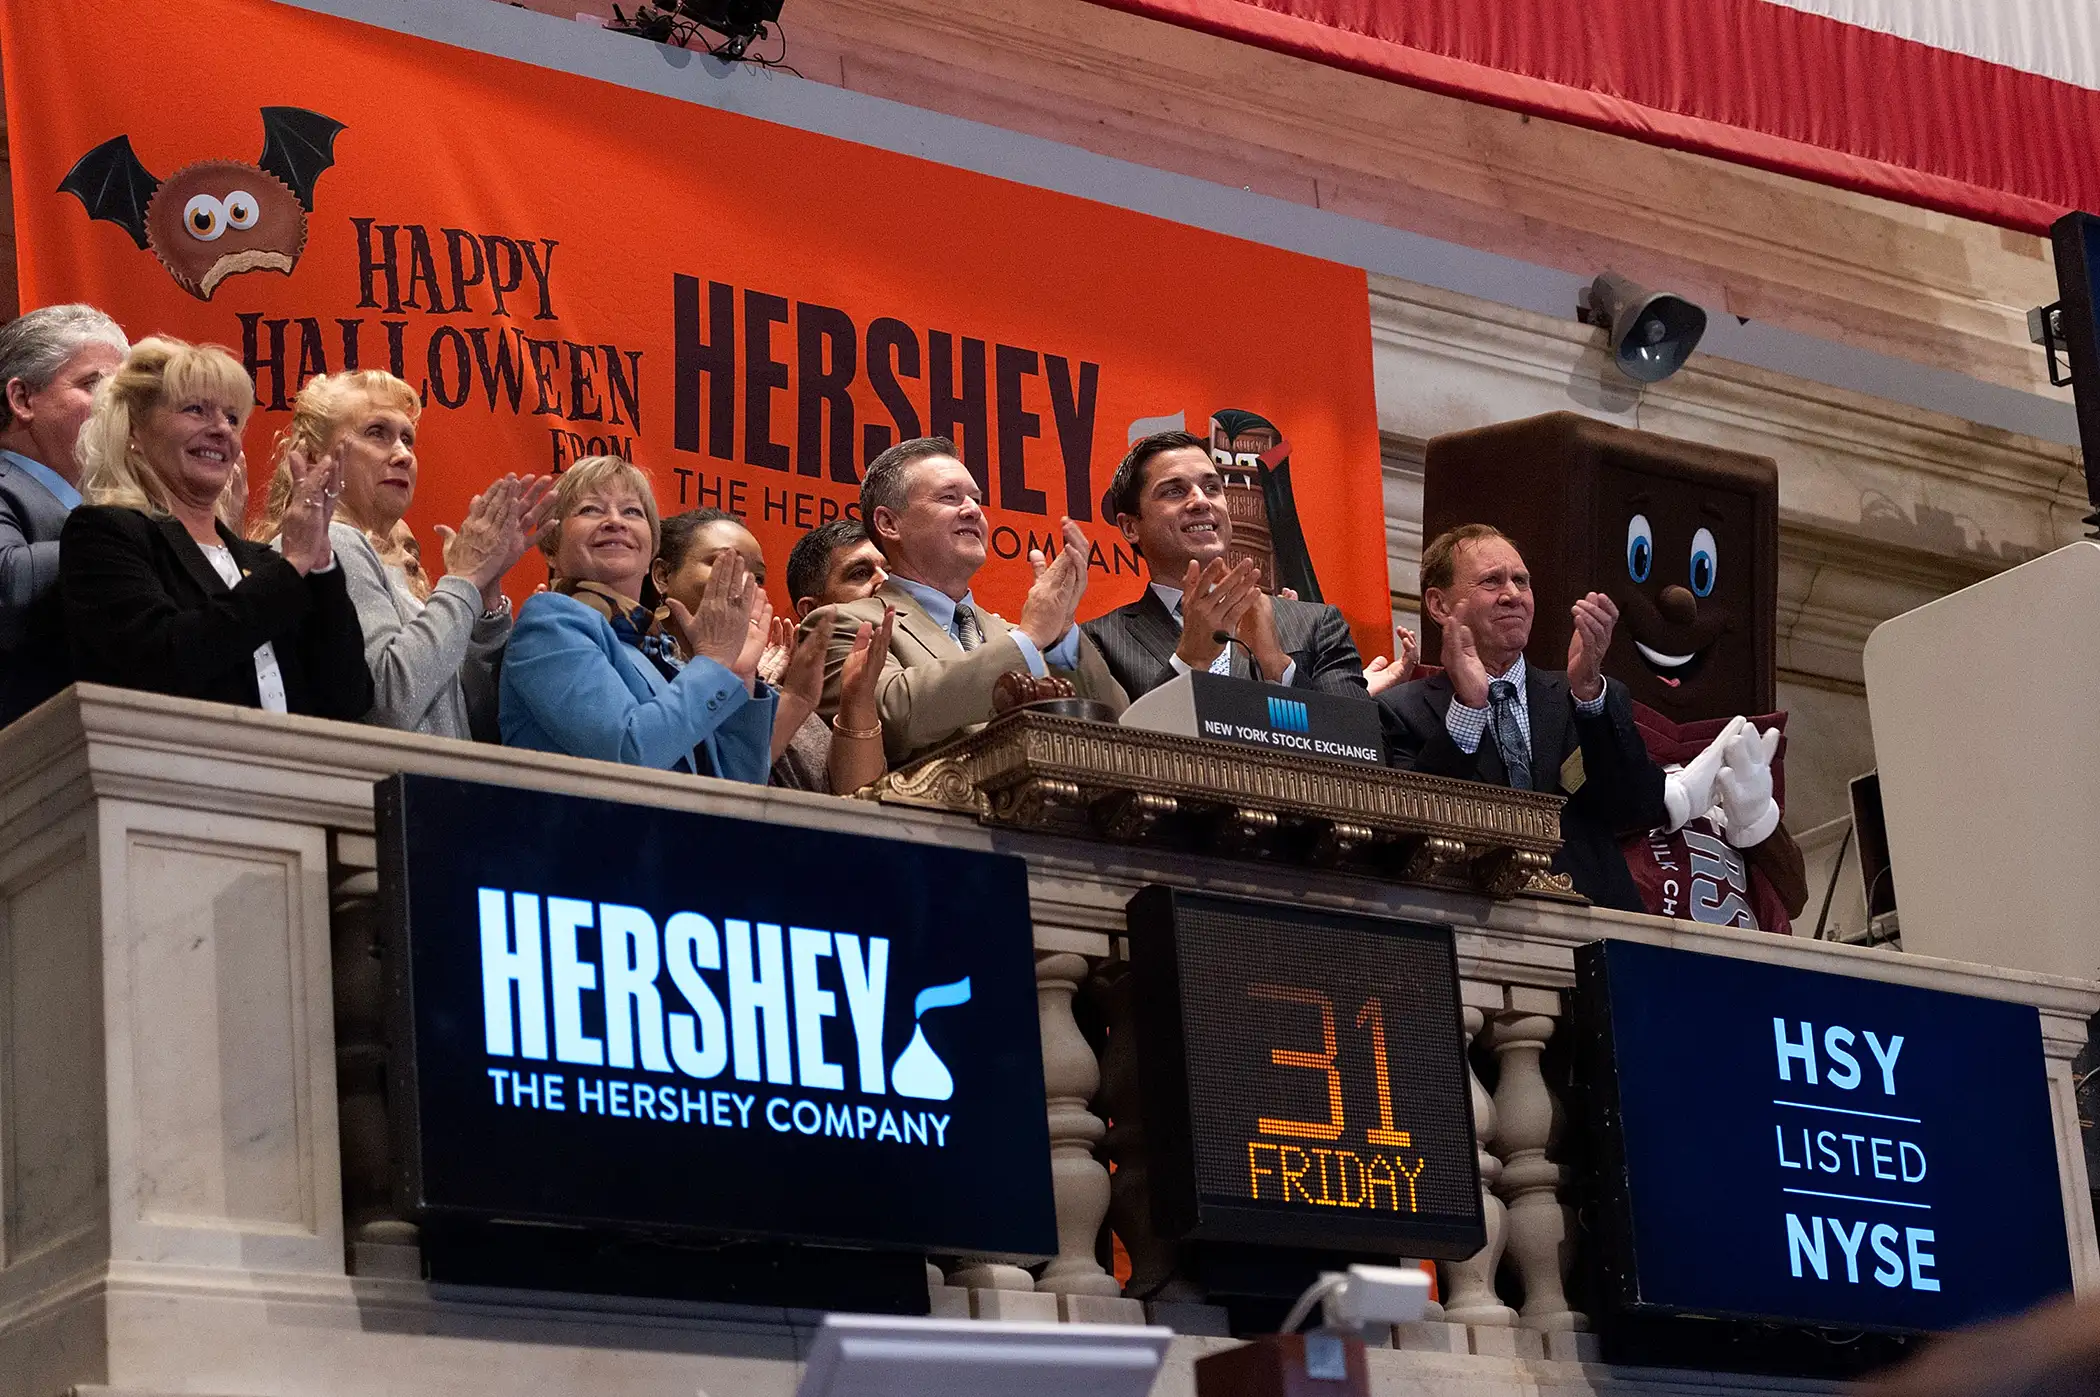 The Hershey Company president and CEO J.P. Bilbrey (C) rings the NYSE Opening Bell at the New York Stock Exchange on October 31, 2014 in New York City.